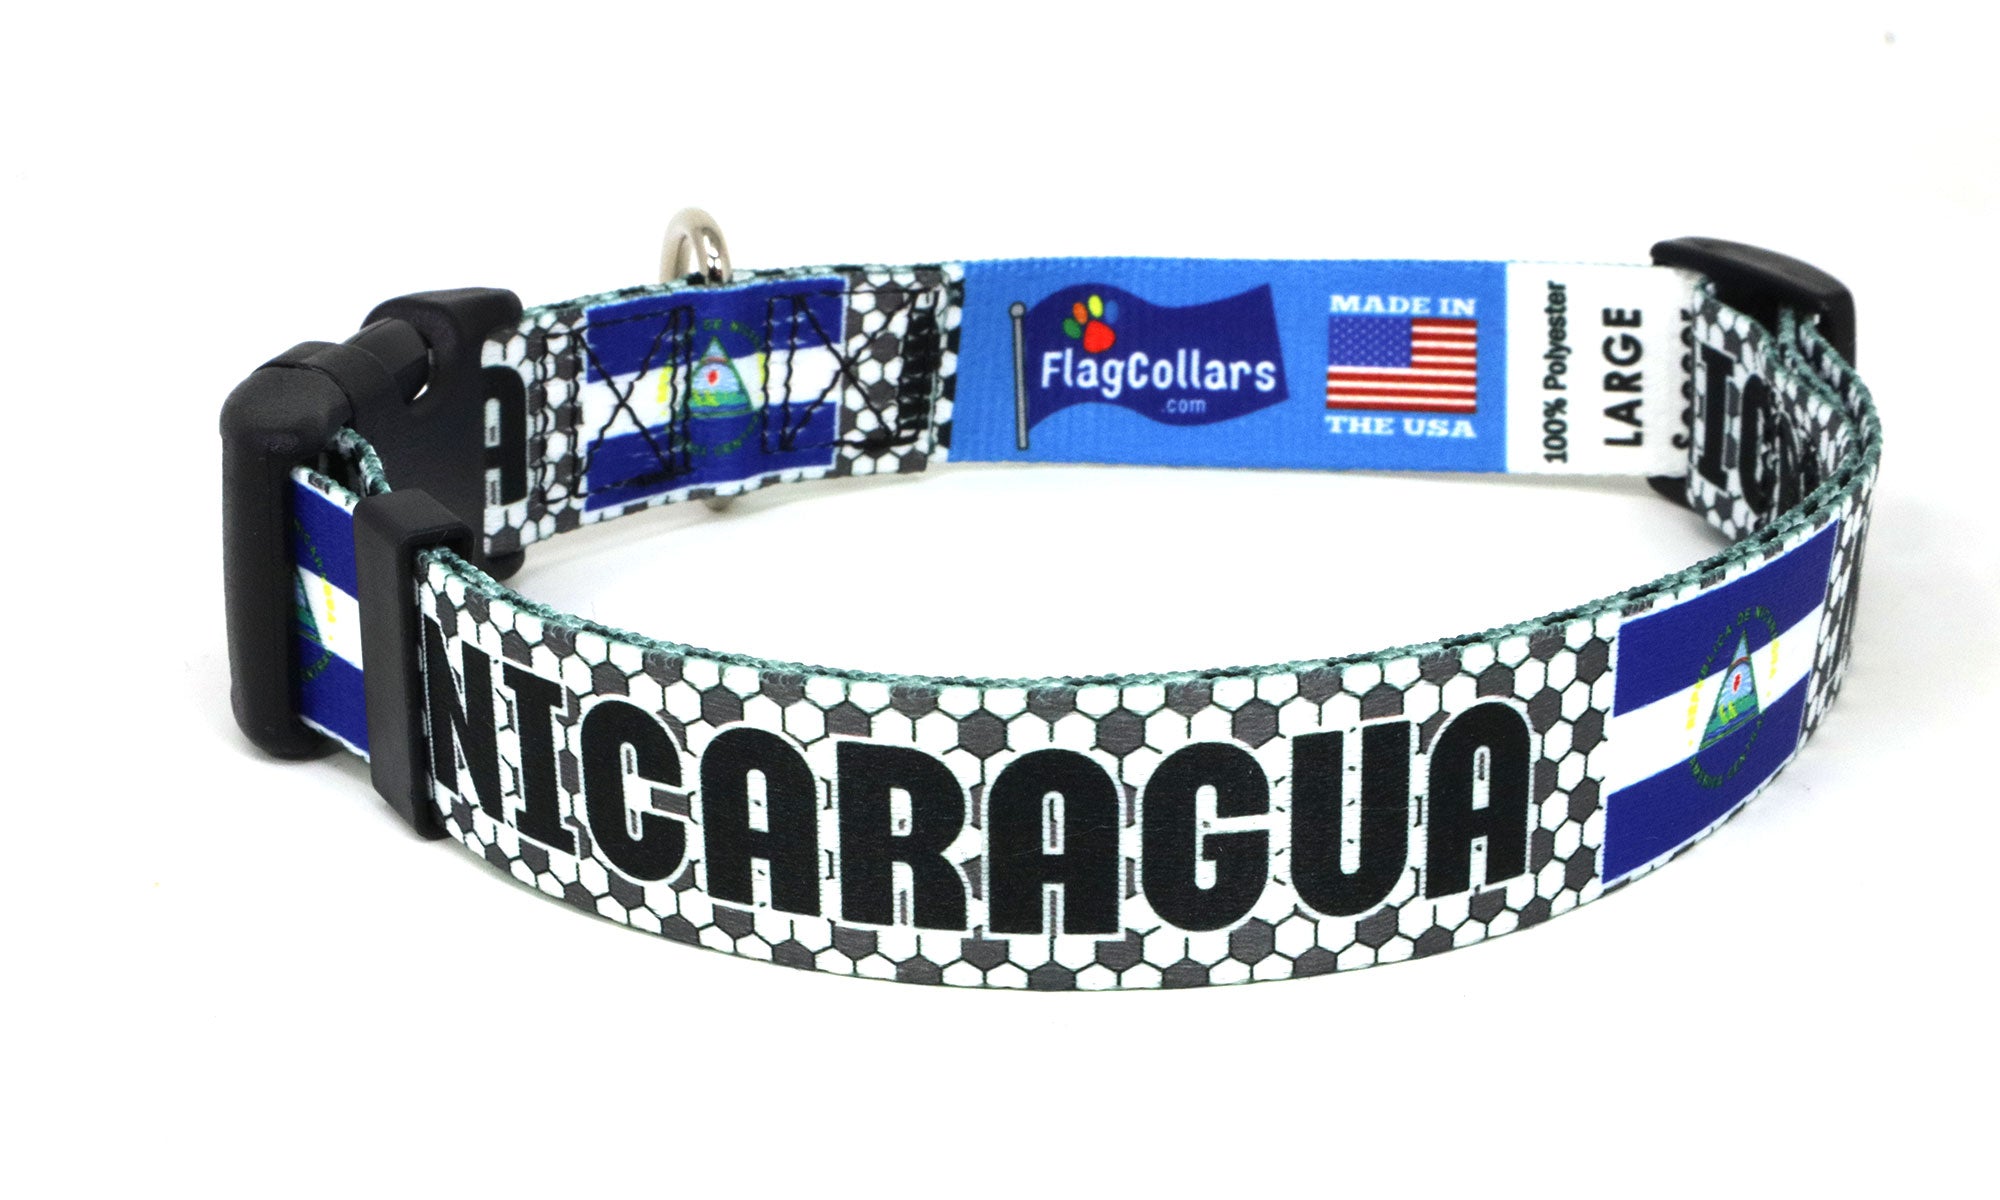 Nicaragua  Dog Collar for Soccer Fans | Black or Pink | Quick Release or Martingale Style | Made in NJ, USA